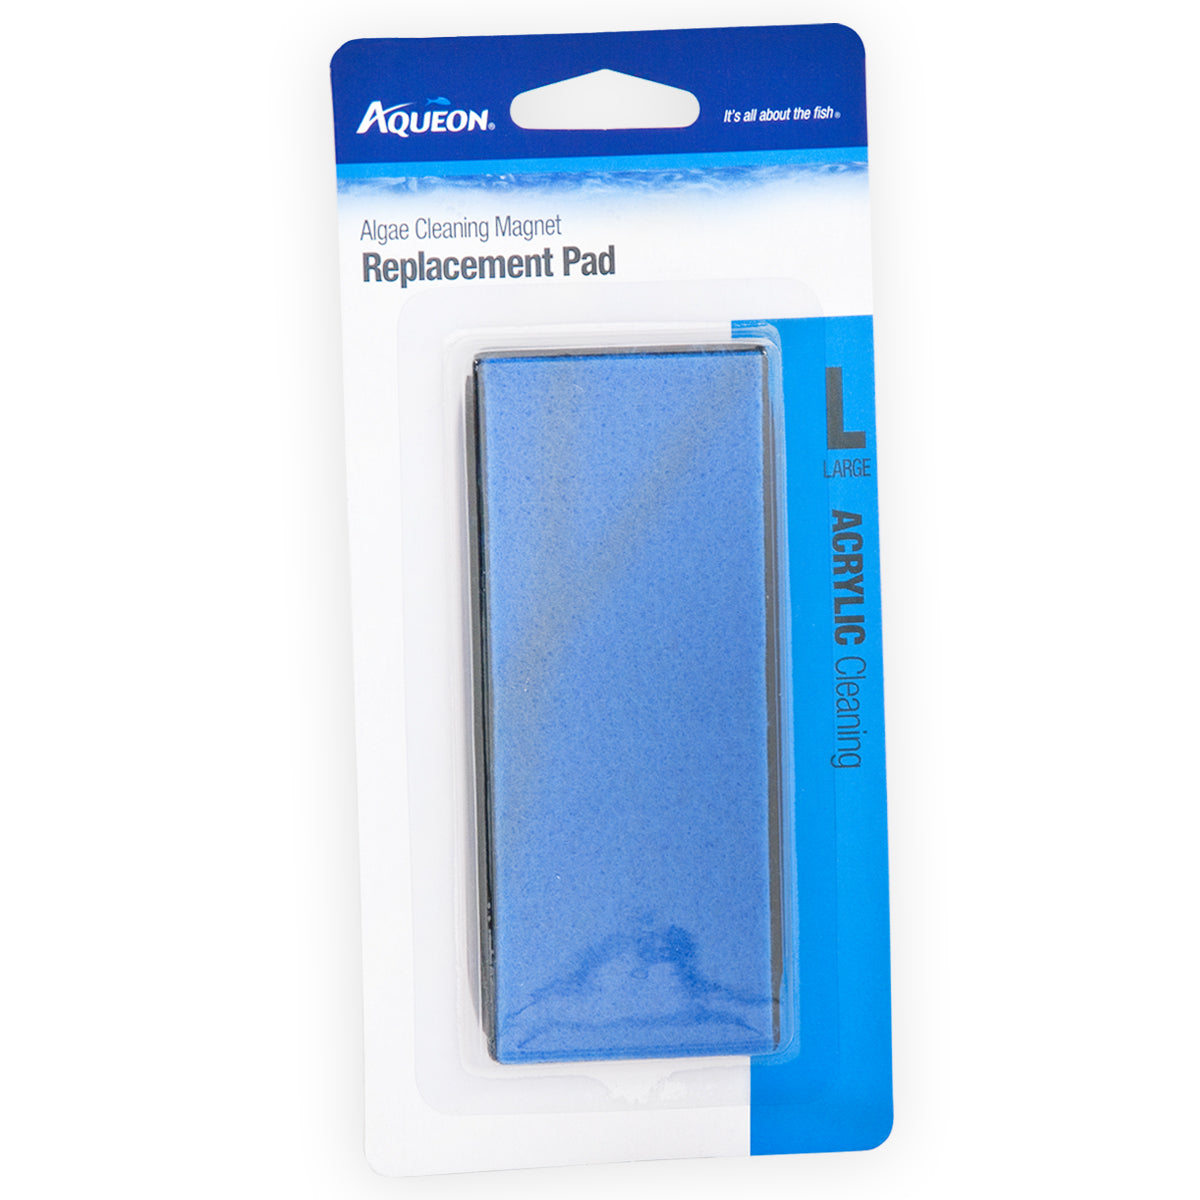 Aqueon Algae Cleaning Magnet Replacement Pad Acrylic - Large